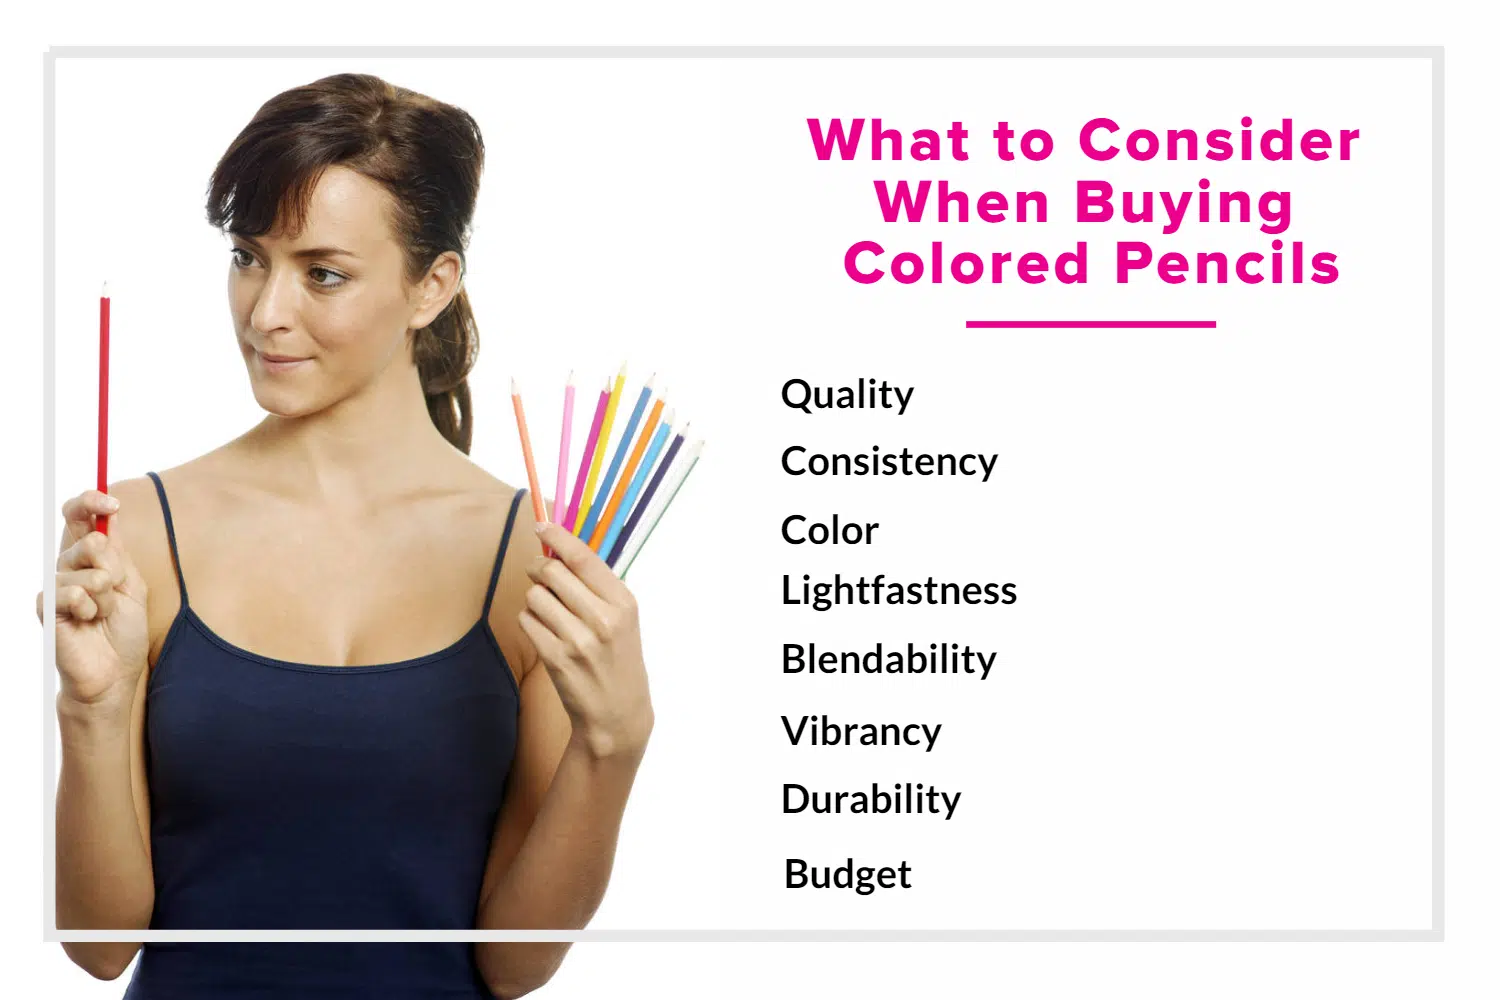 What to Consider When Buying Colored Pencils